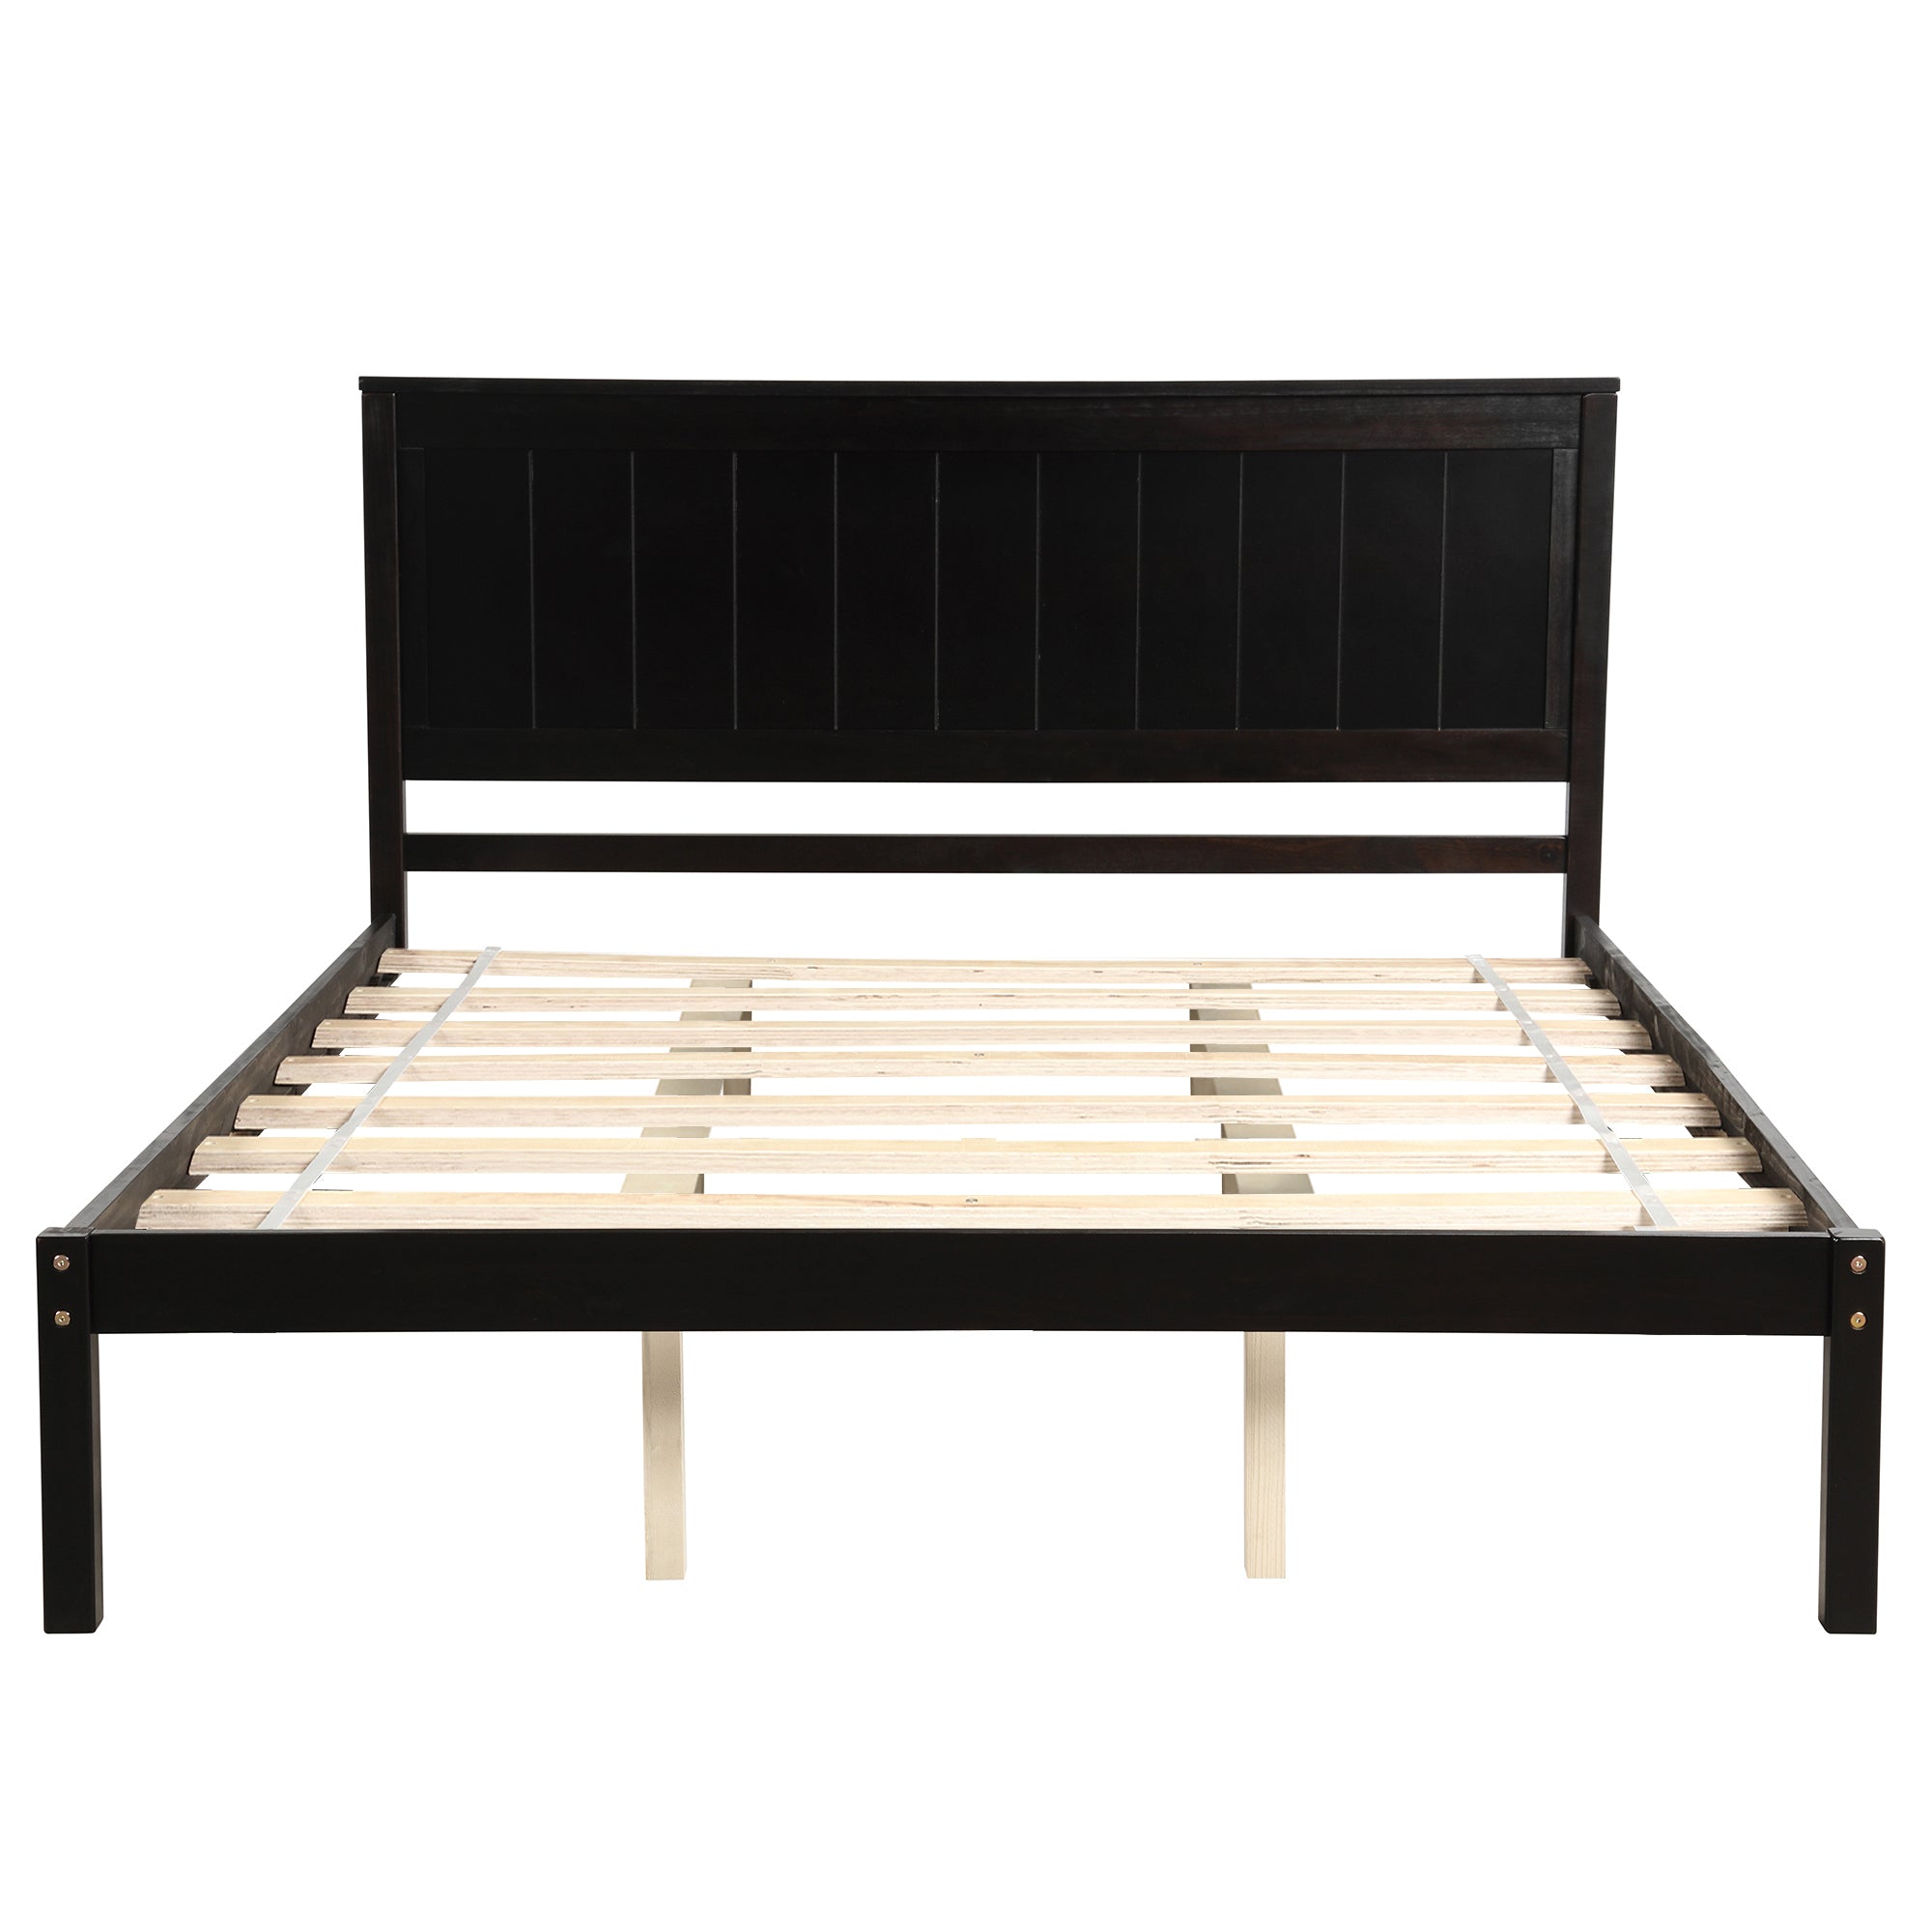 Queen Size Espresso Platform Bed Frame with Headboard By: Alabama Beds